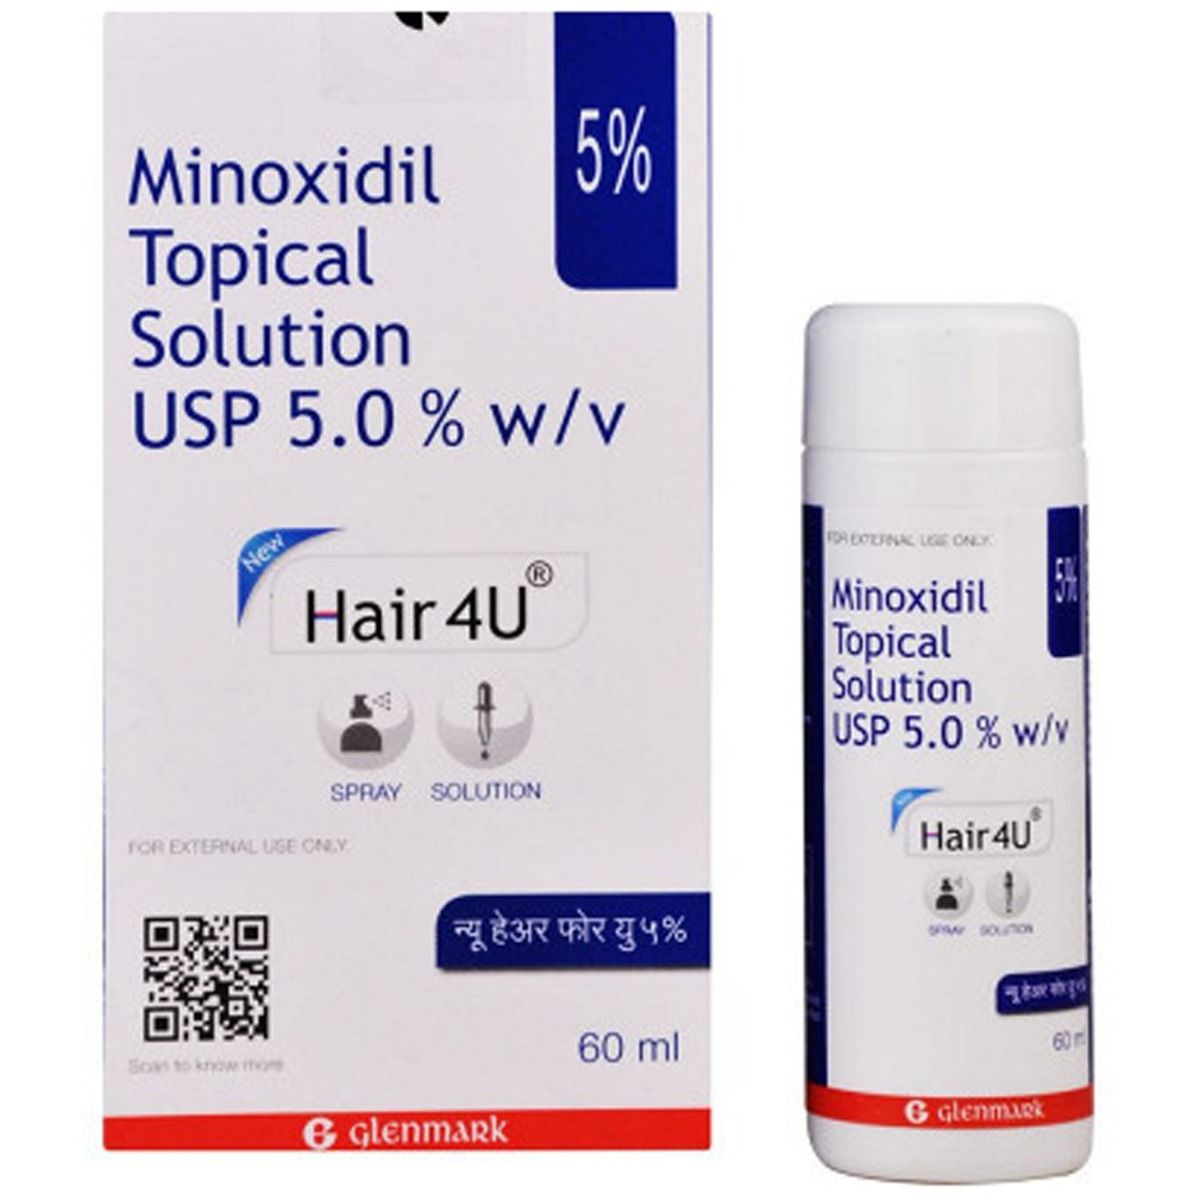 New Hair 4U 5% Solution 60 ml Price, Uses, Side Effects, Composition -  Apollo Pharmacy